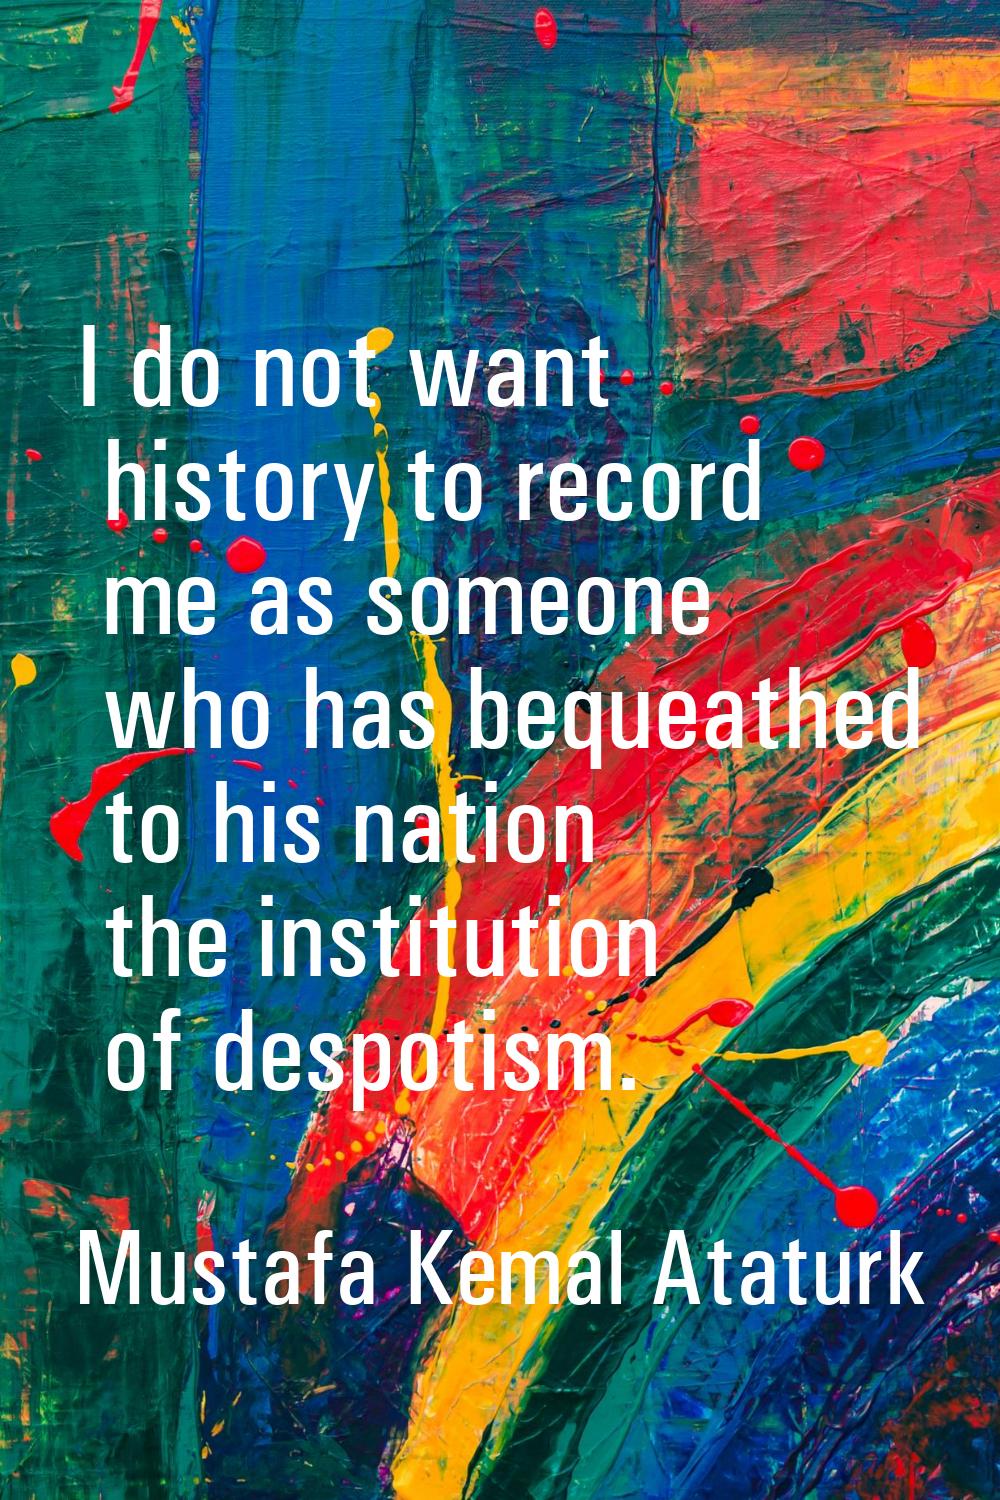 I do not want history to record me as someone who has bequeathed to his nation the institution of d